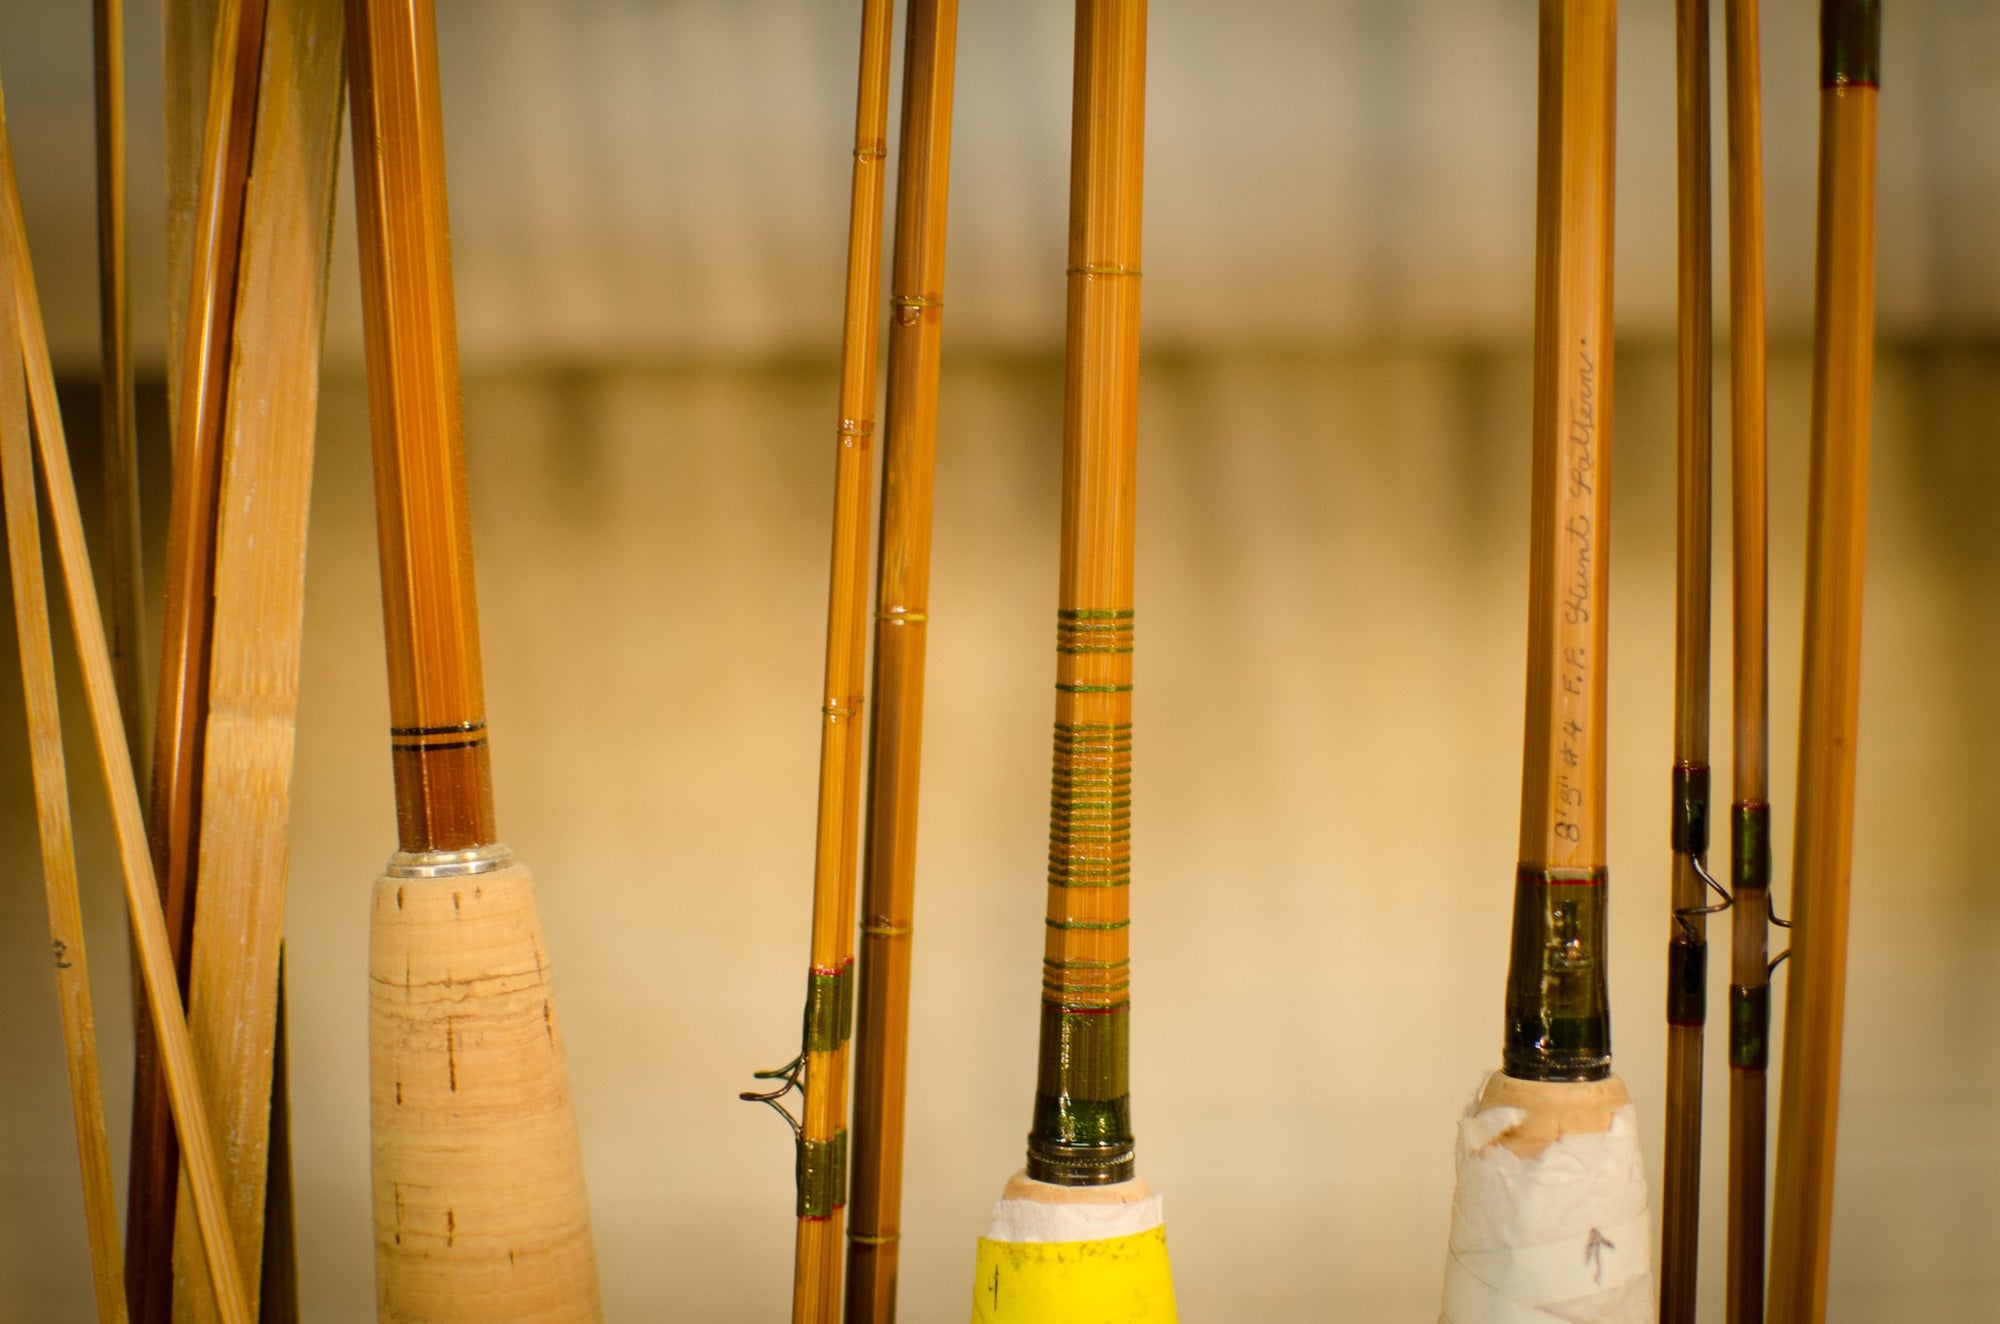 Taper Talk: Fly Rod Design and Swelled Butts